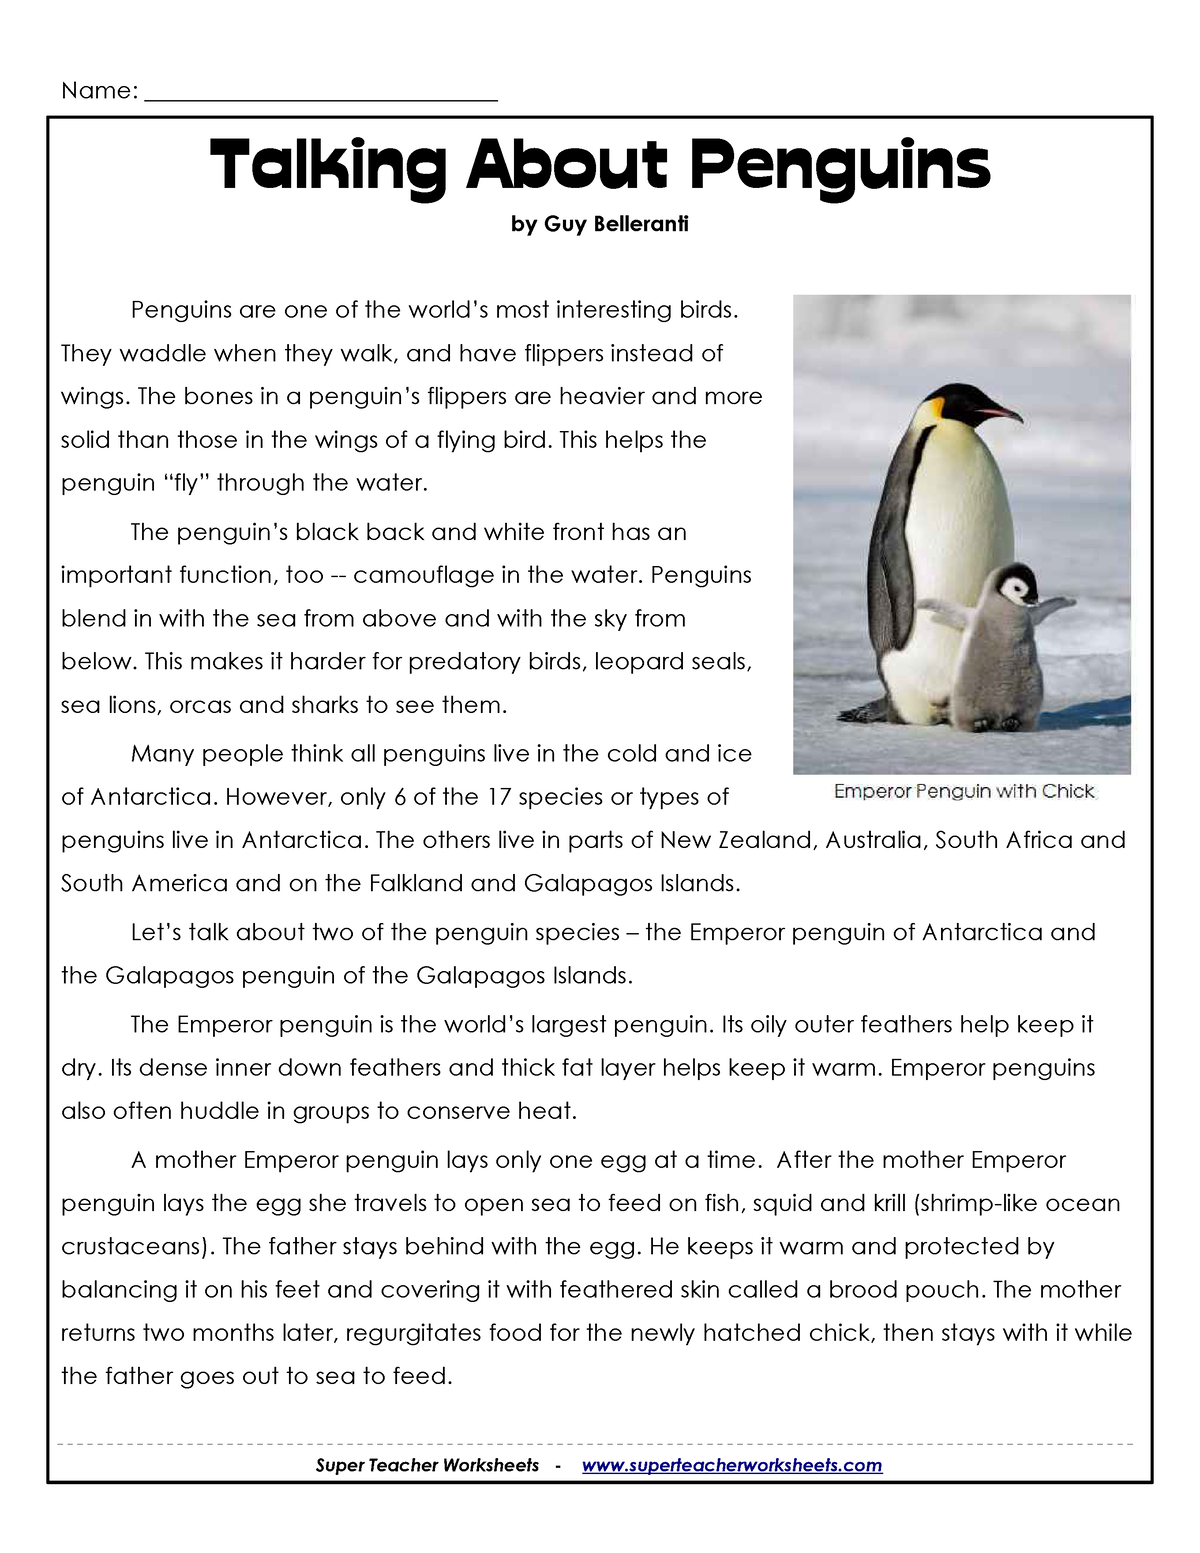 For penguins, leading or following might be more about relationships